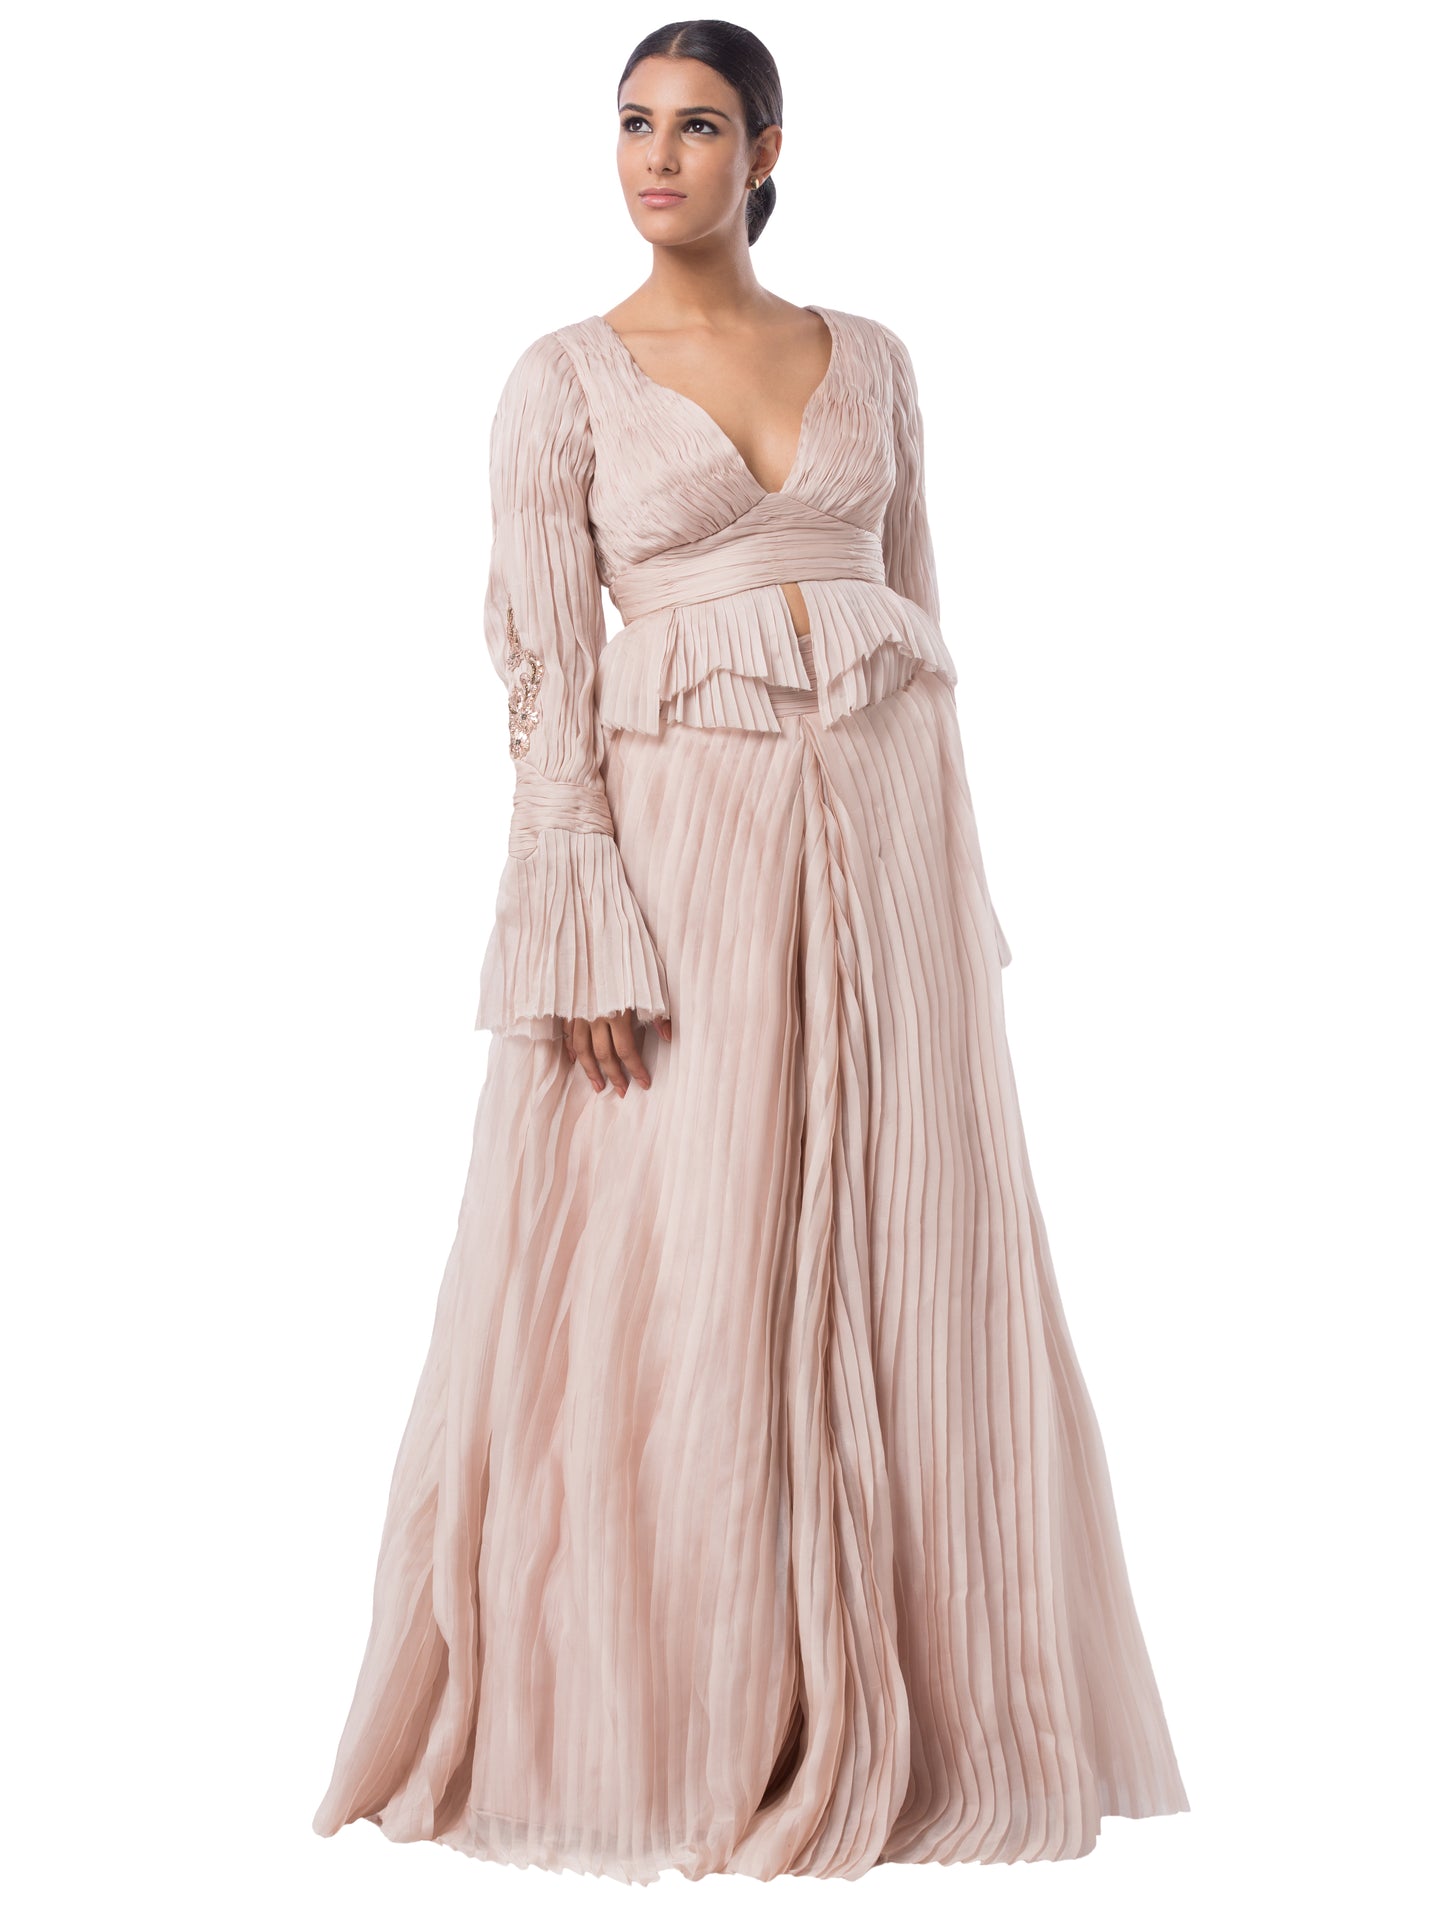 Rouged Top With Peplum With Victorian Sleeves Pleated Ballroom Skirt